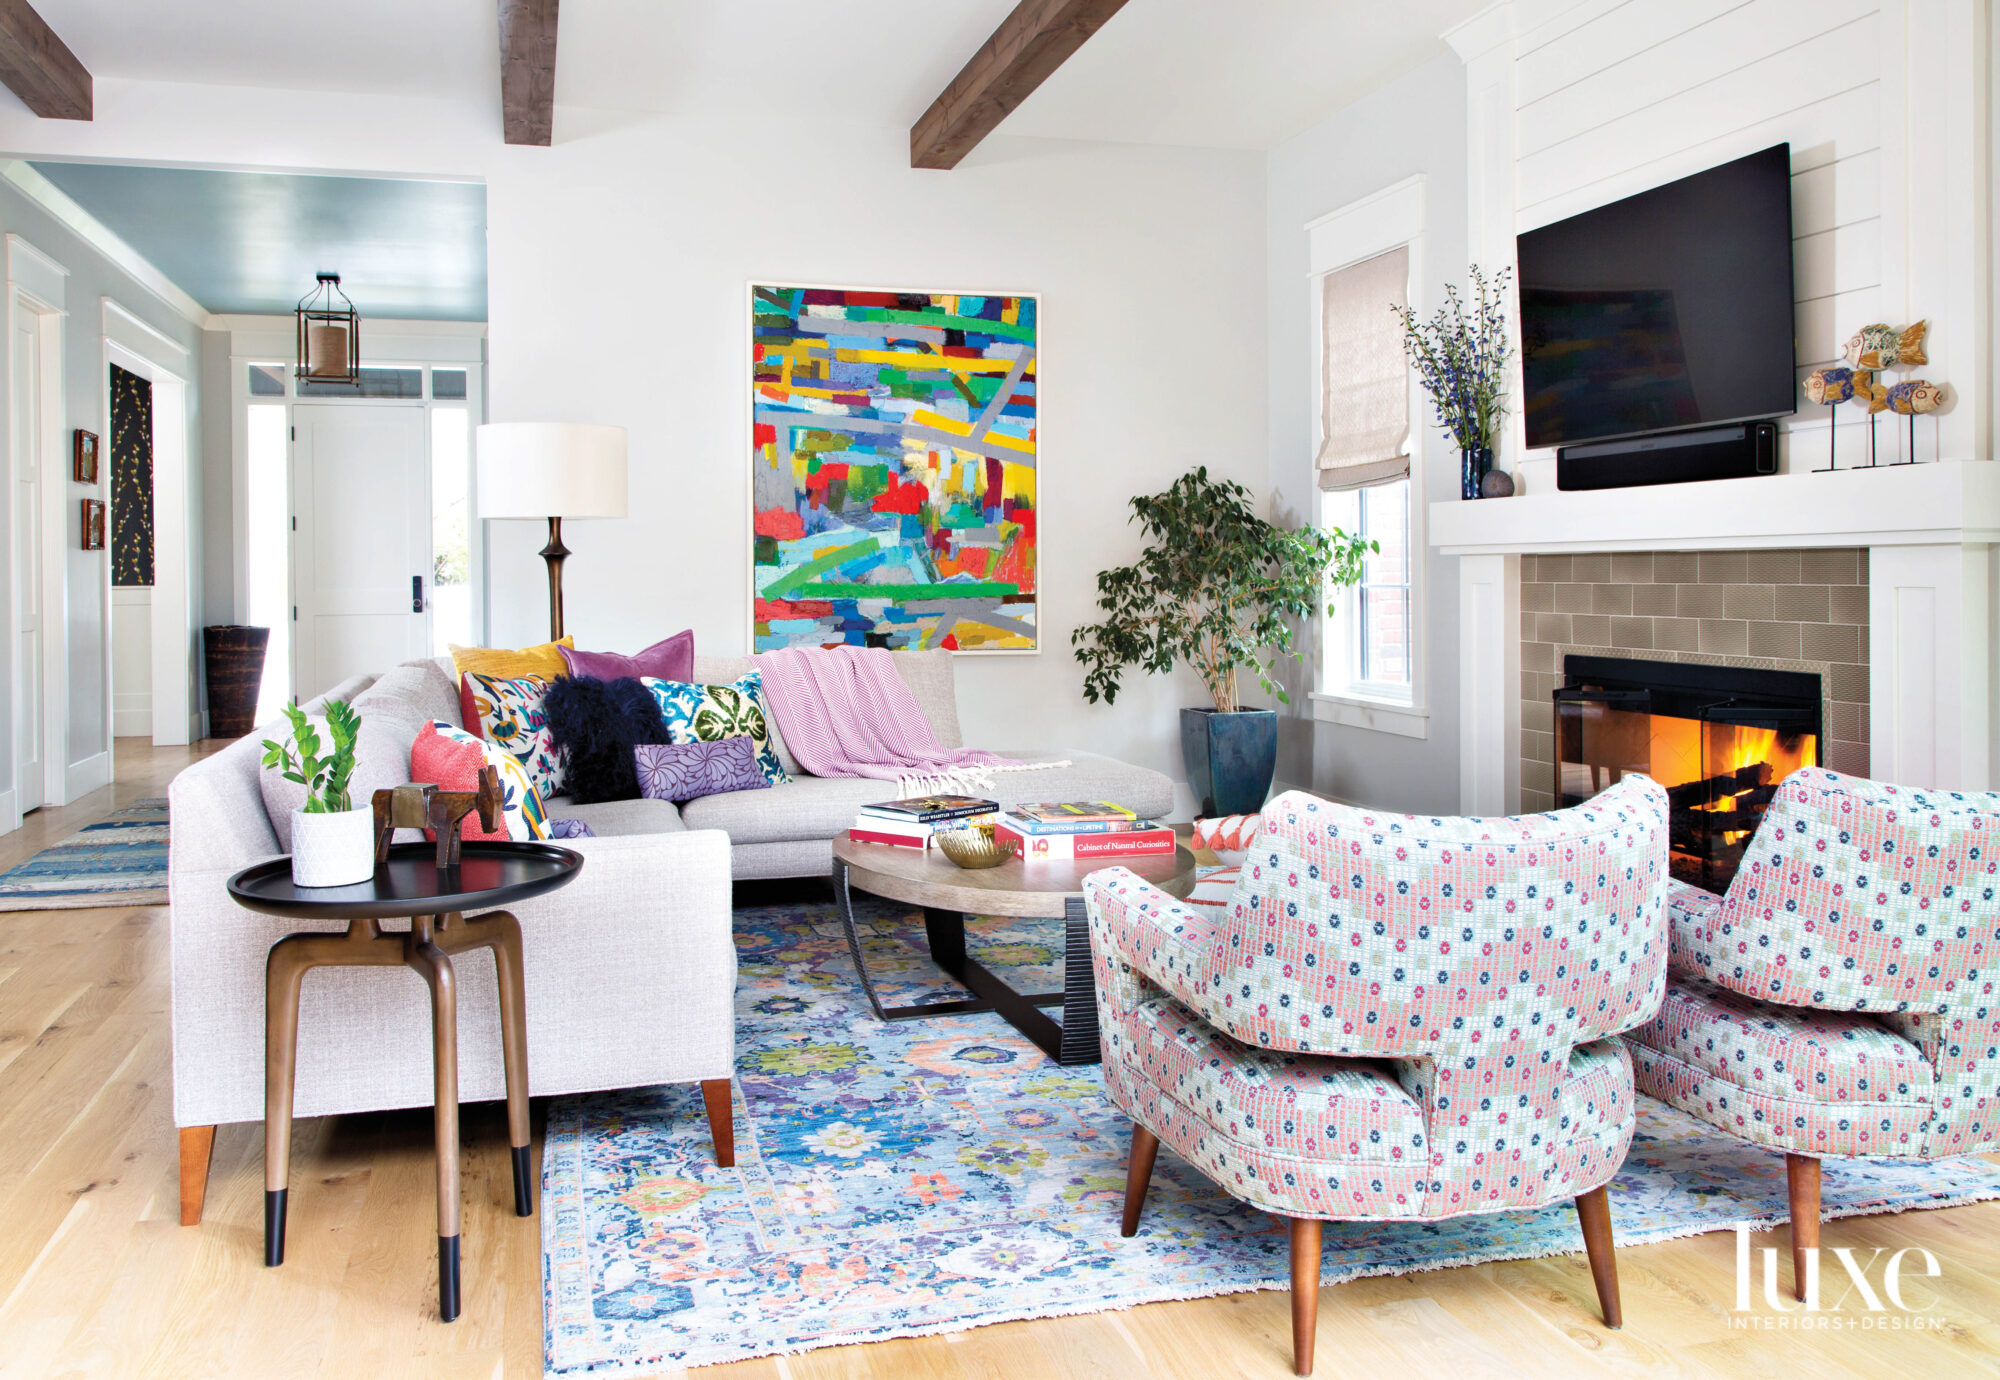 The living room has doses of bright color in the art, upholstery and rug.